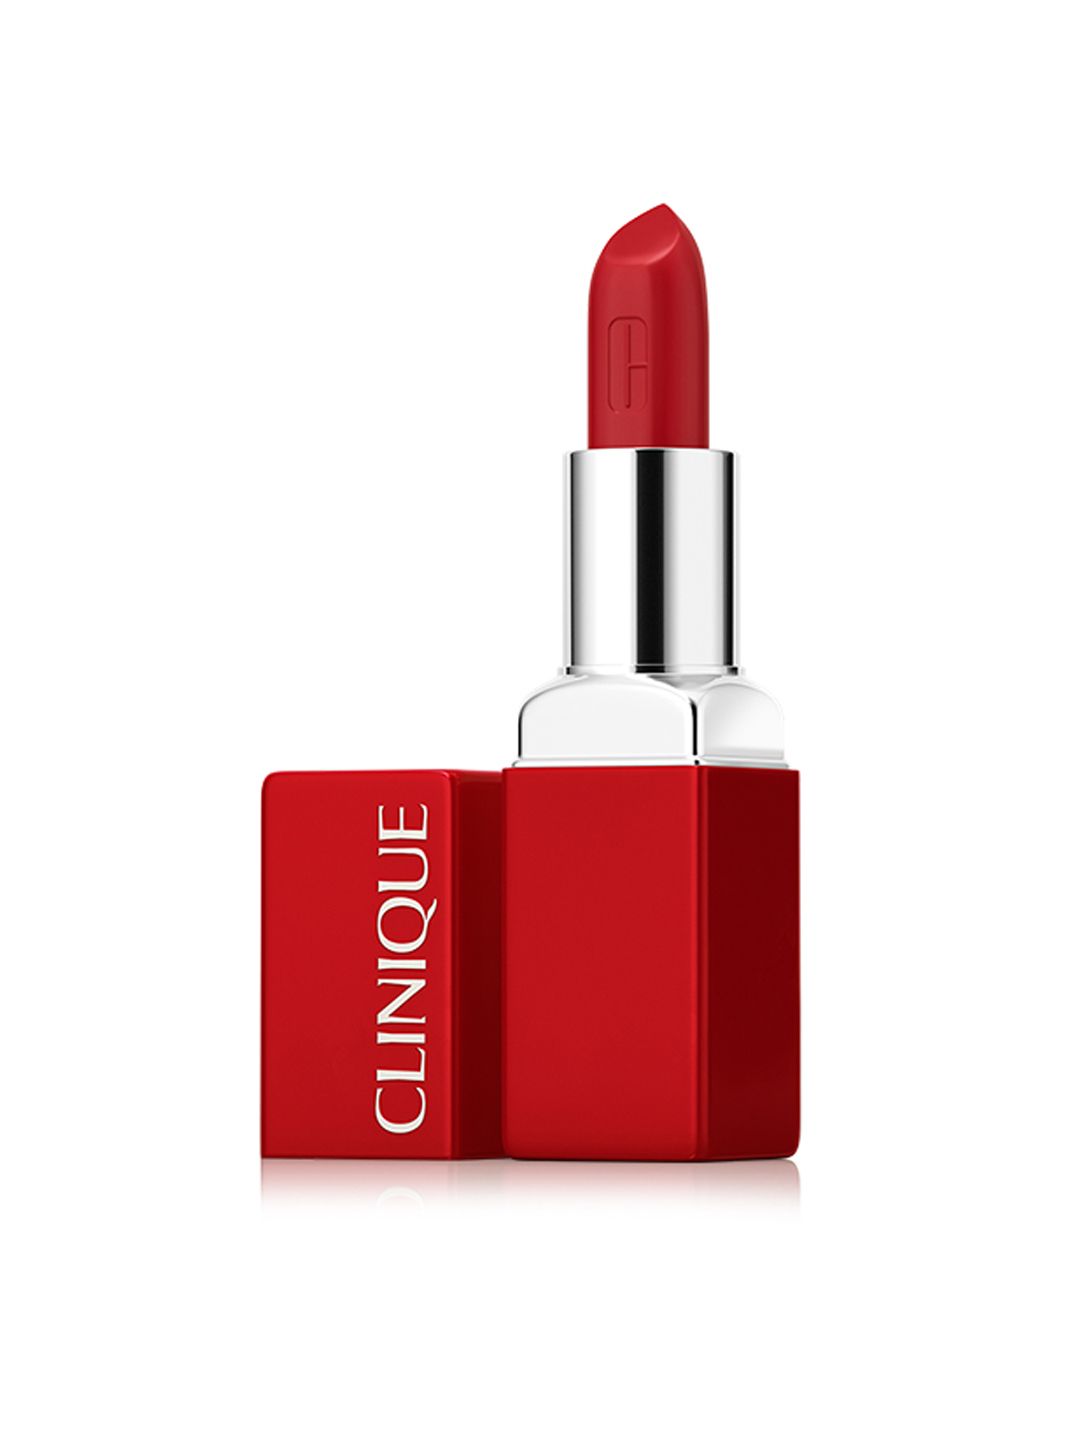 Clinique Pop Reds Cheek + Lipstick - Red-Handed 02 Price in India